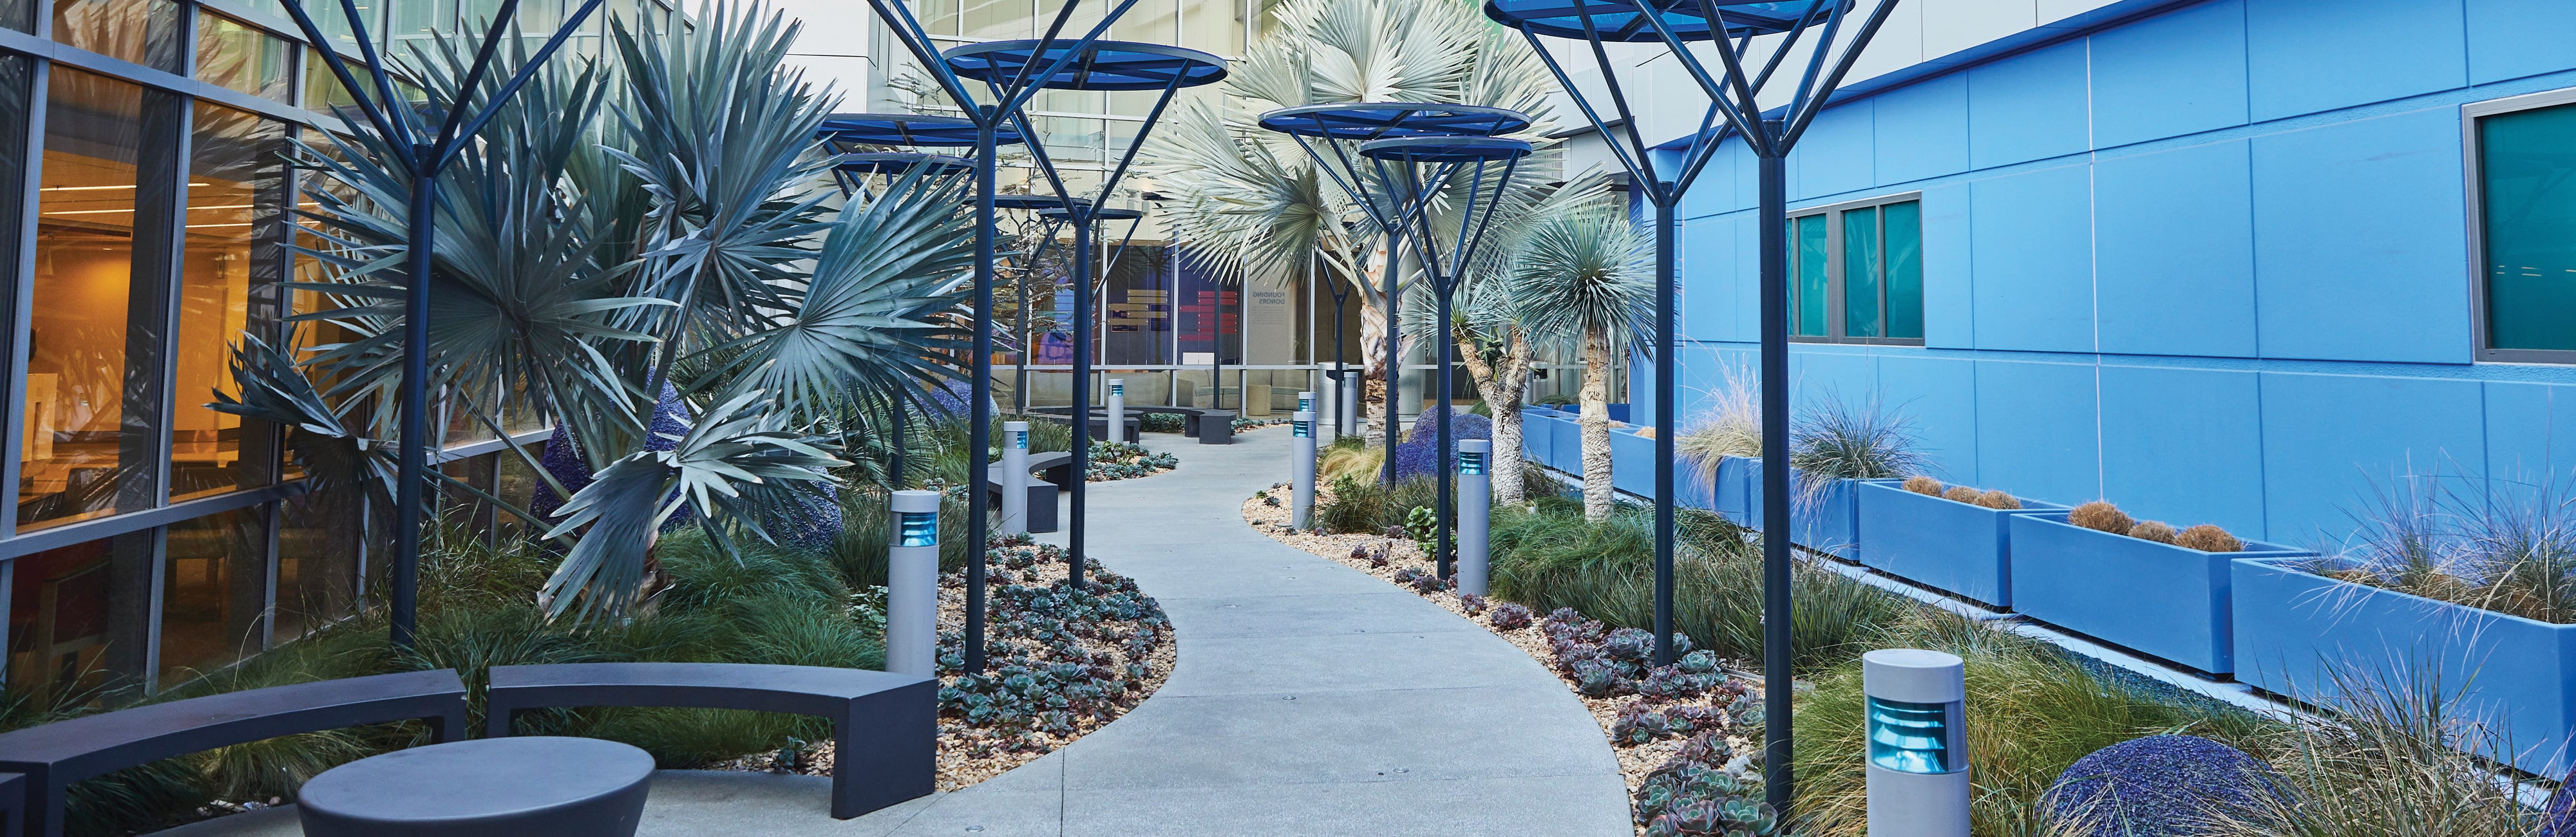 Tall blue shade coverings line the walkway of the hospital's healing garden 